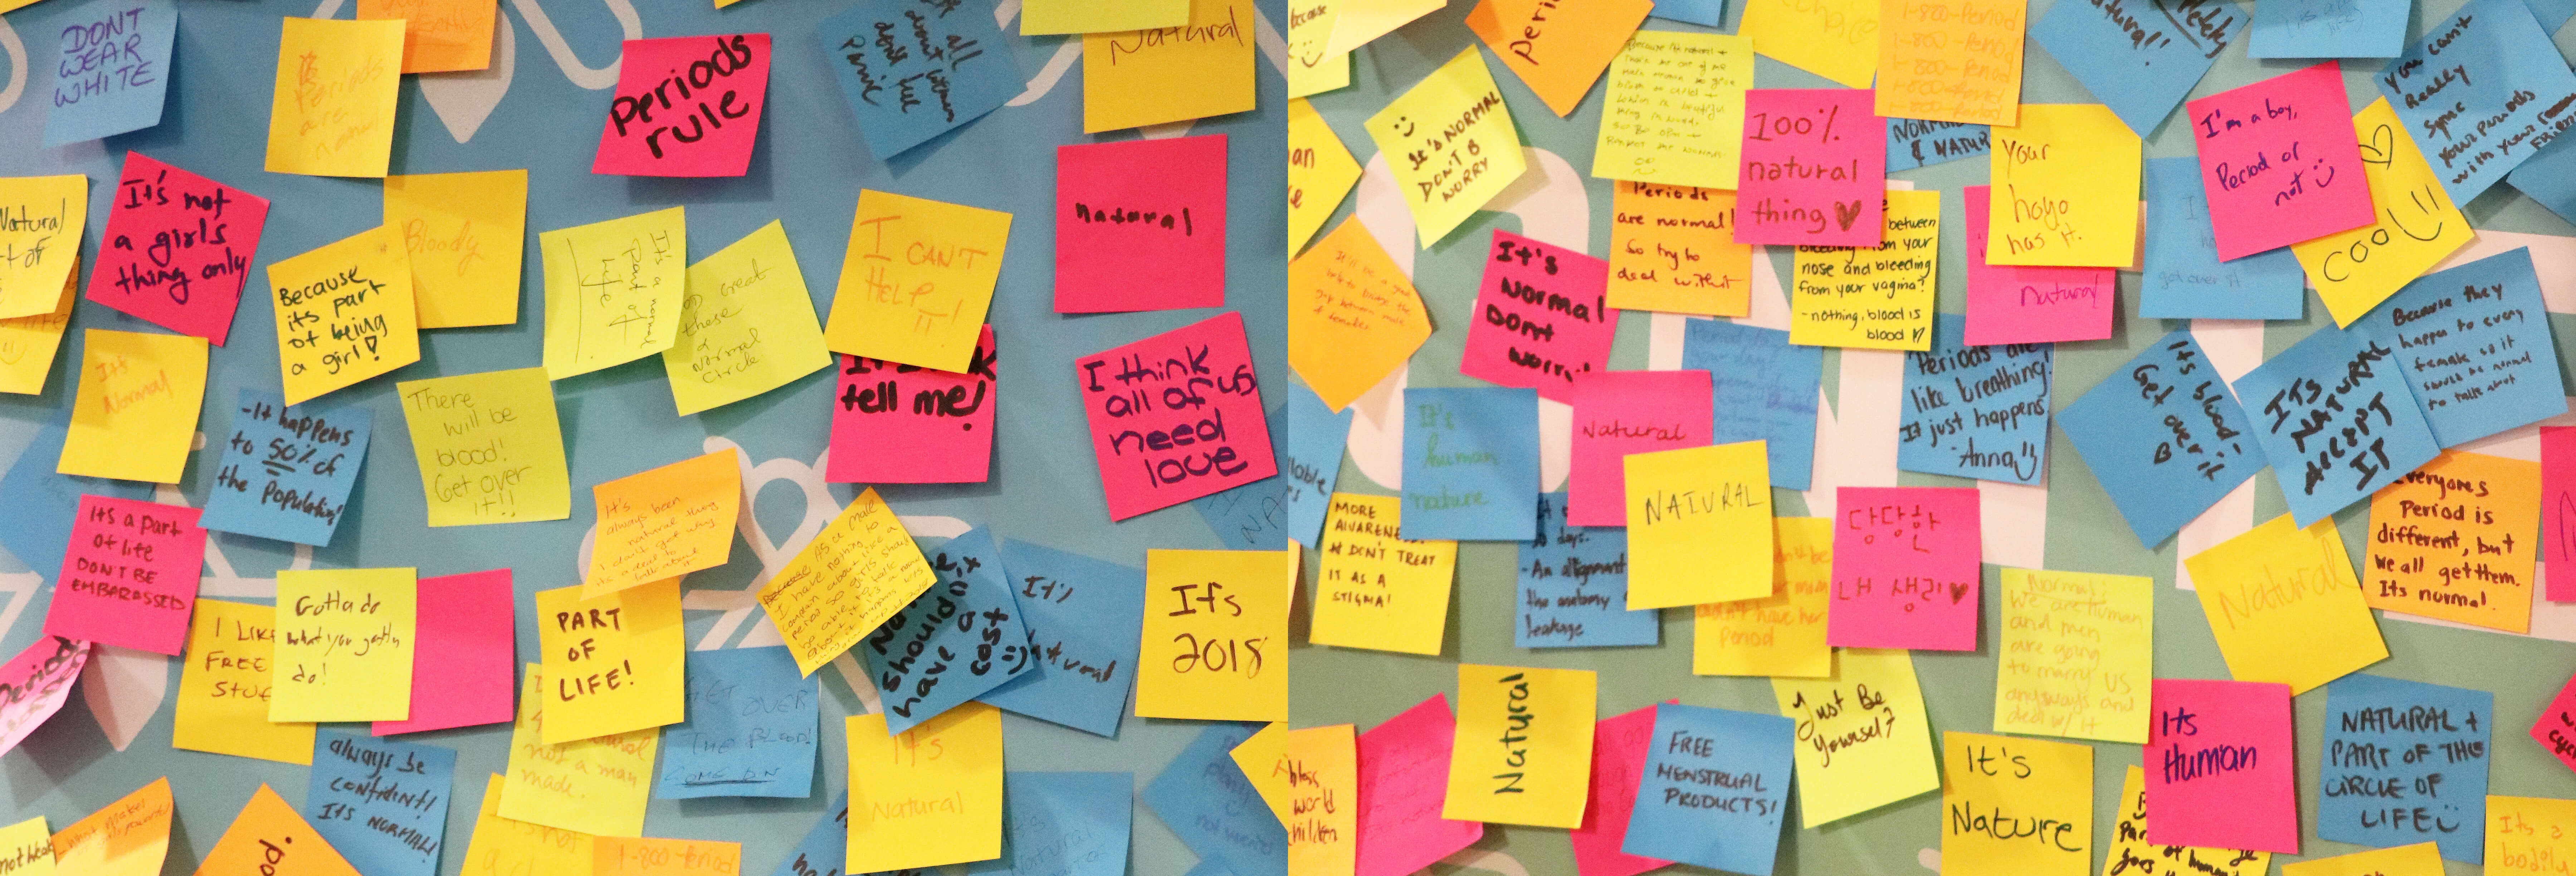 Student post it notes on periods and the stigma